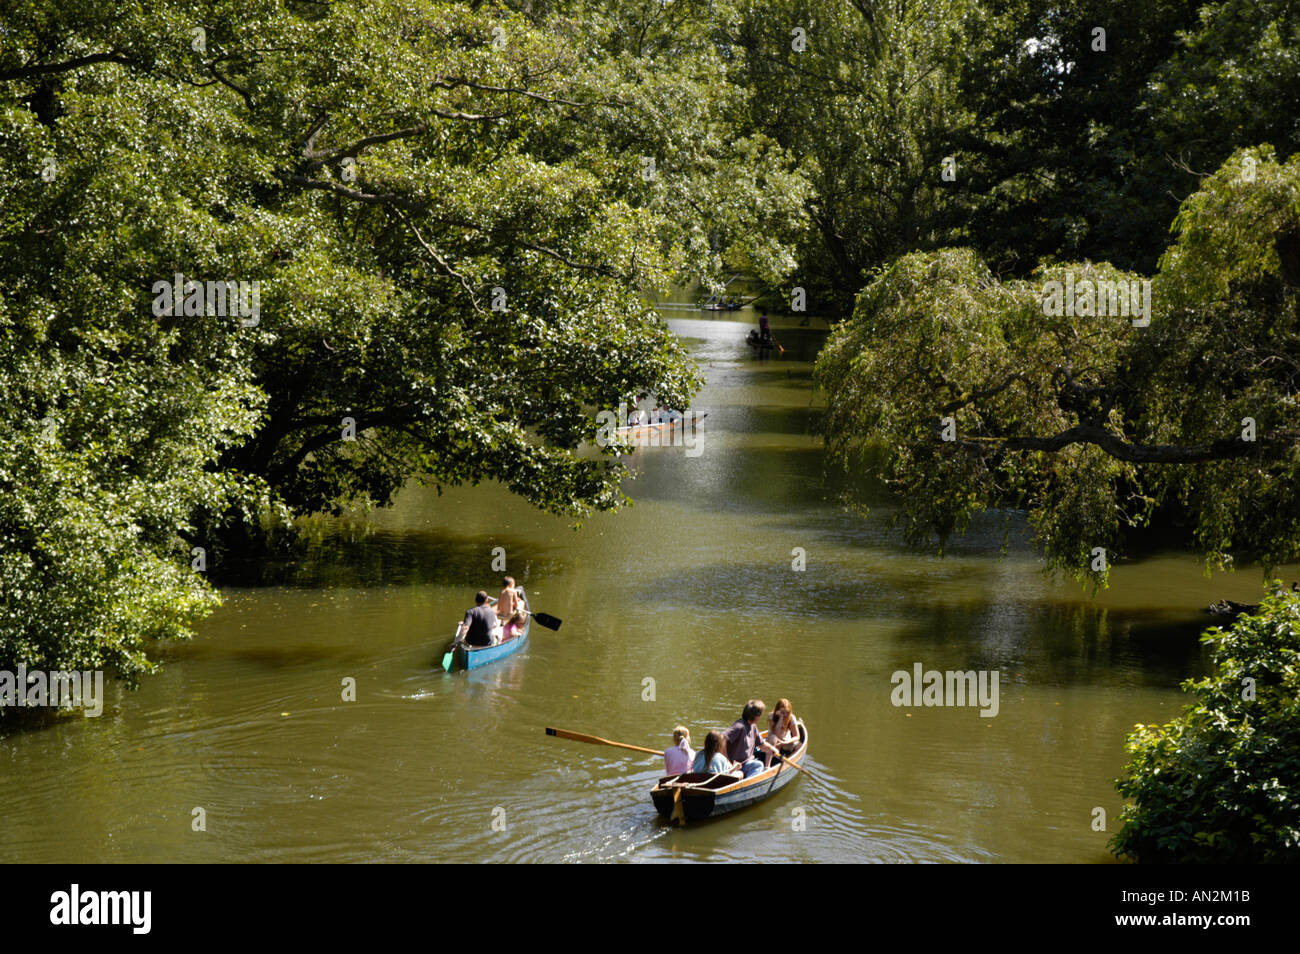 Boating on the River Cherwell Stock Photo